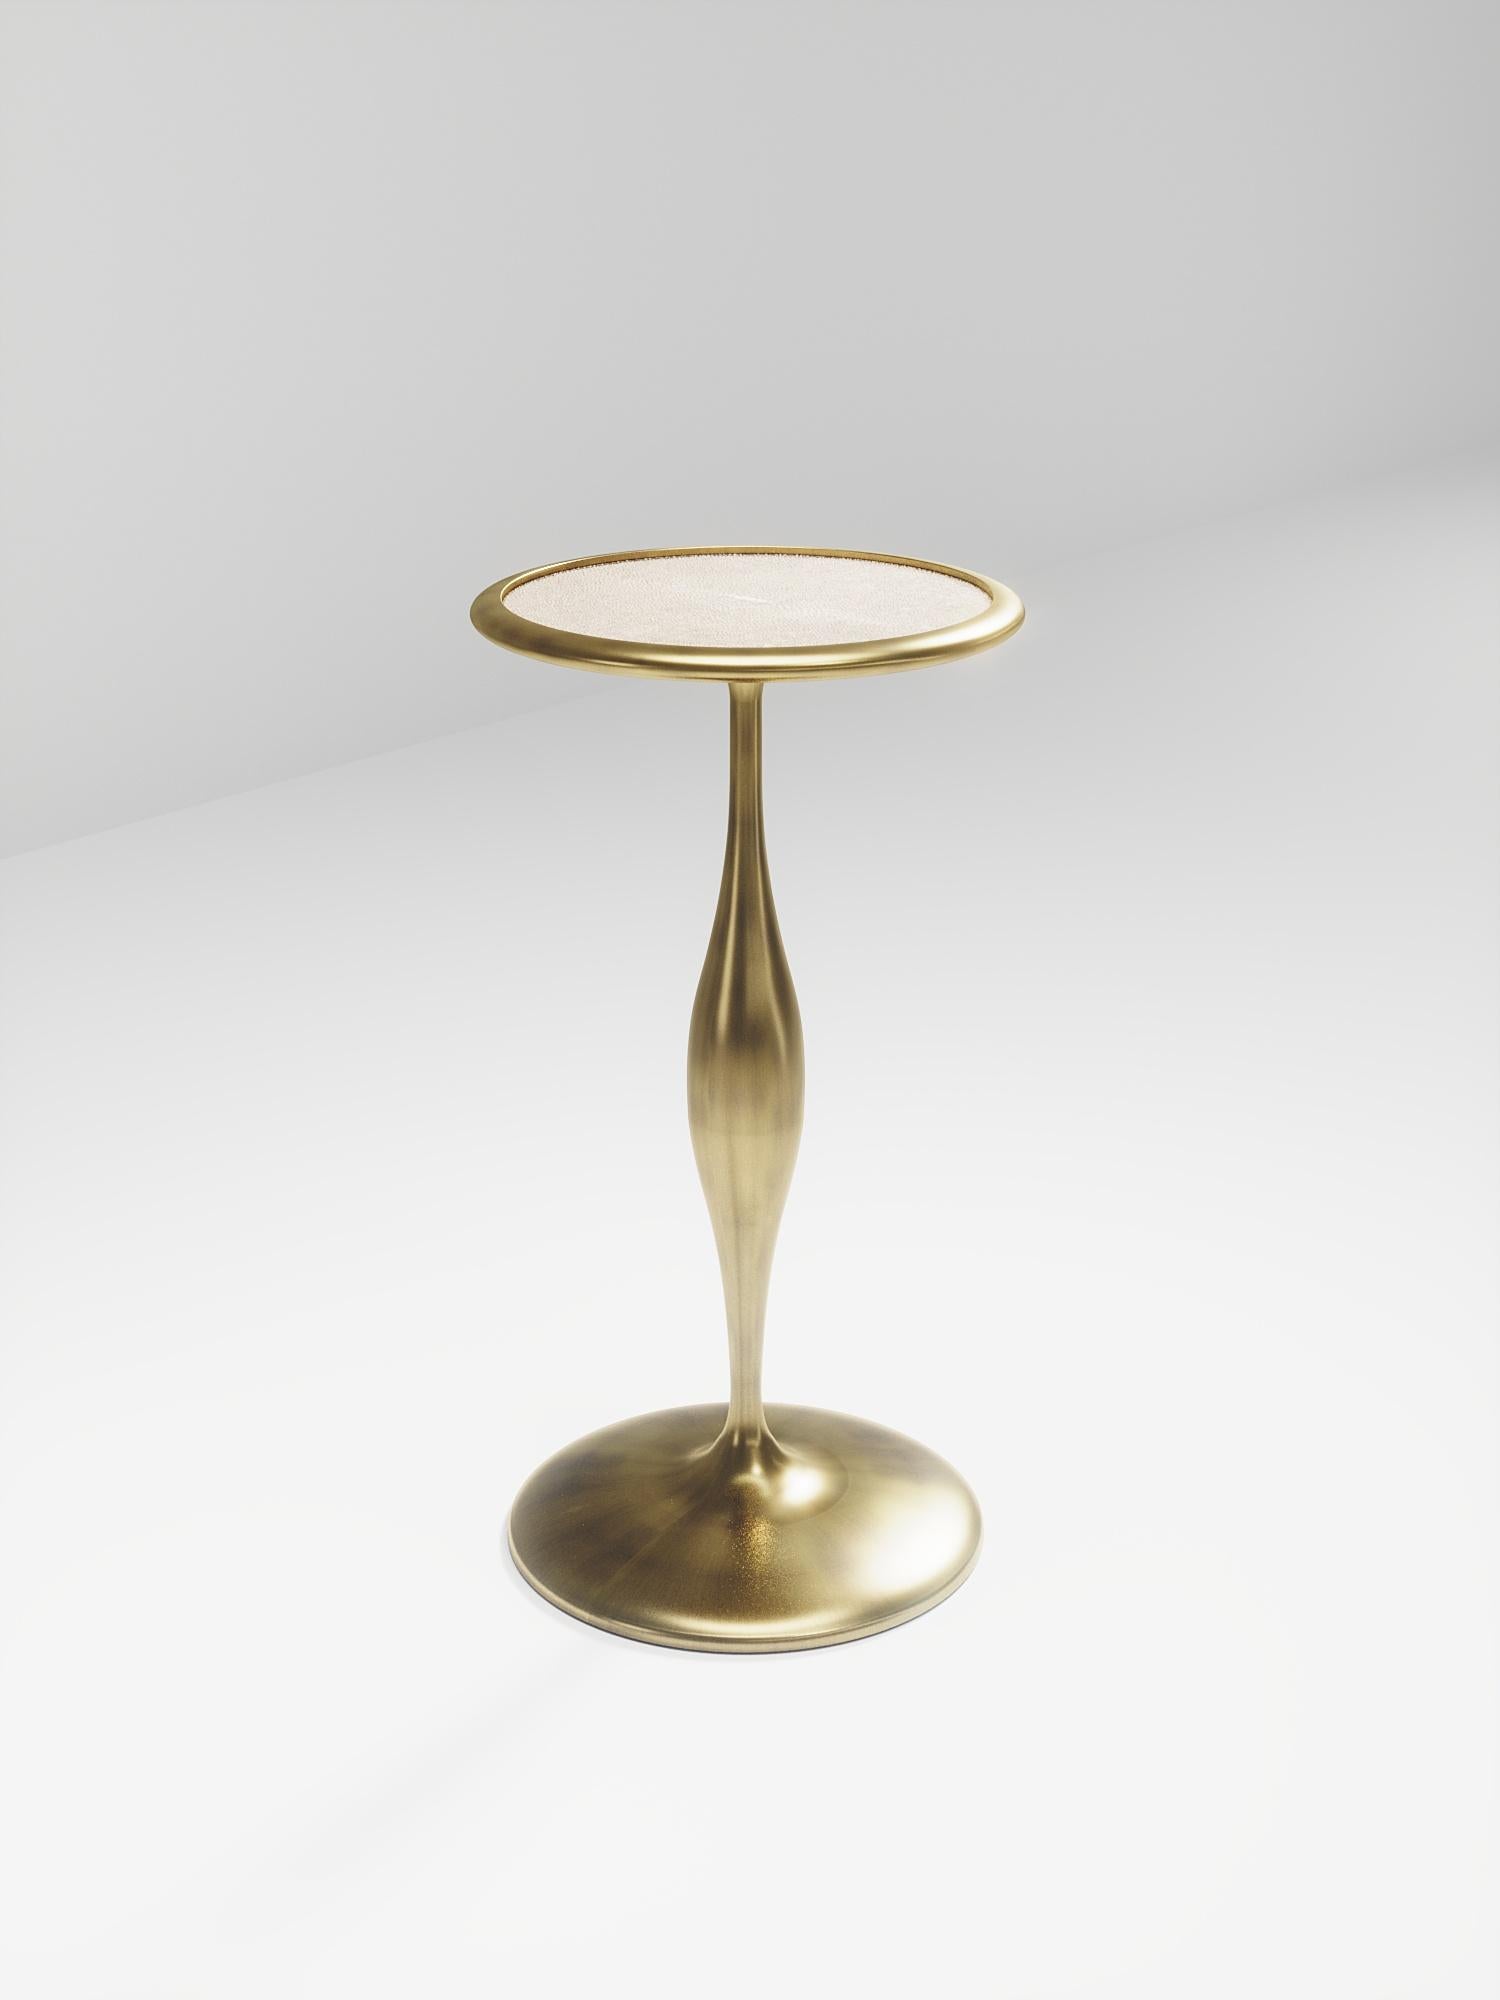 The Frequency side table II by R & Y Augousti is a sleek piece with a vintage-modern feel. The piece explores fluid organic lines with subtle detailing to create the signature Augousti aesthetic. The piece is inlaid in a mixture of cream shagreen